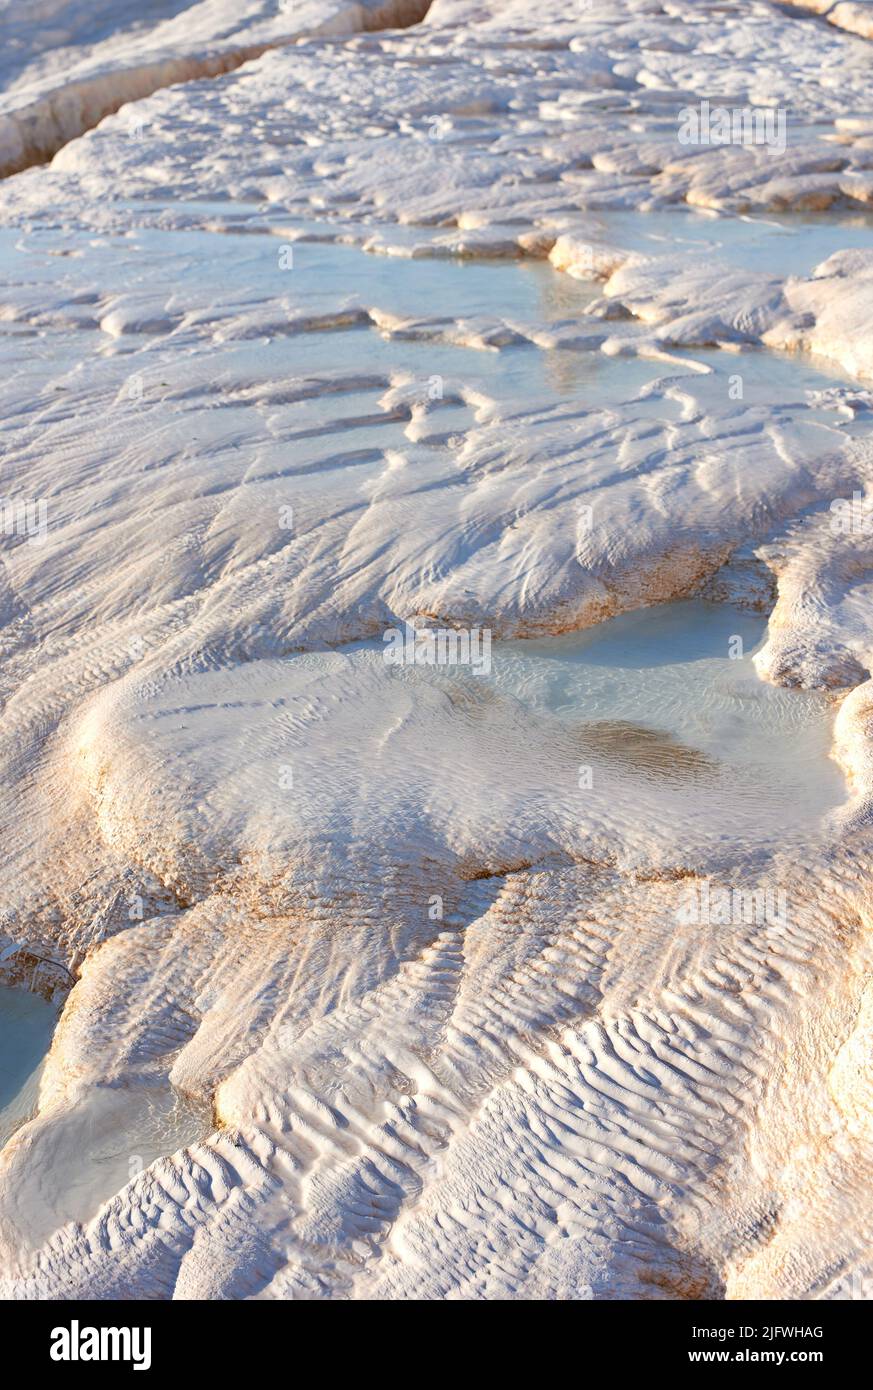 Closeup of travertine pools and terraces in Pamukkale, Turkey. Travelling abroad, overseas for holiday, vacation, tourism. Cotton castle area with Stock Photo